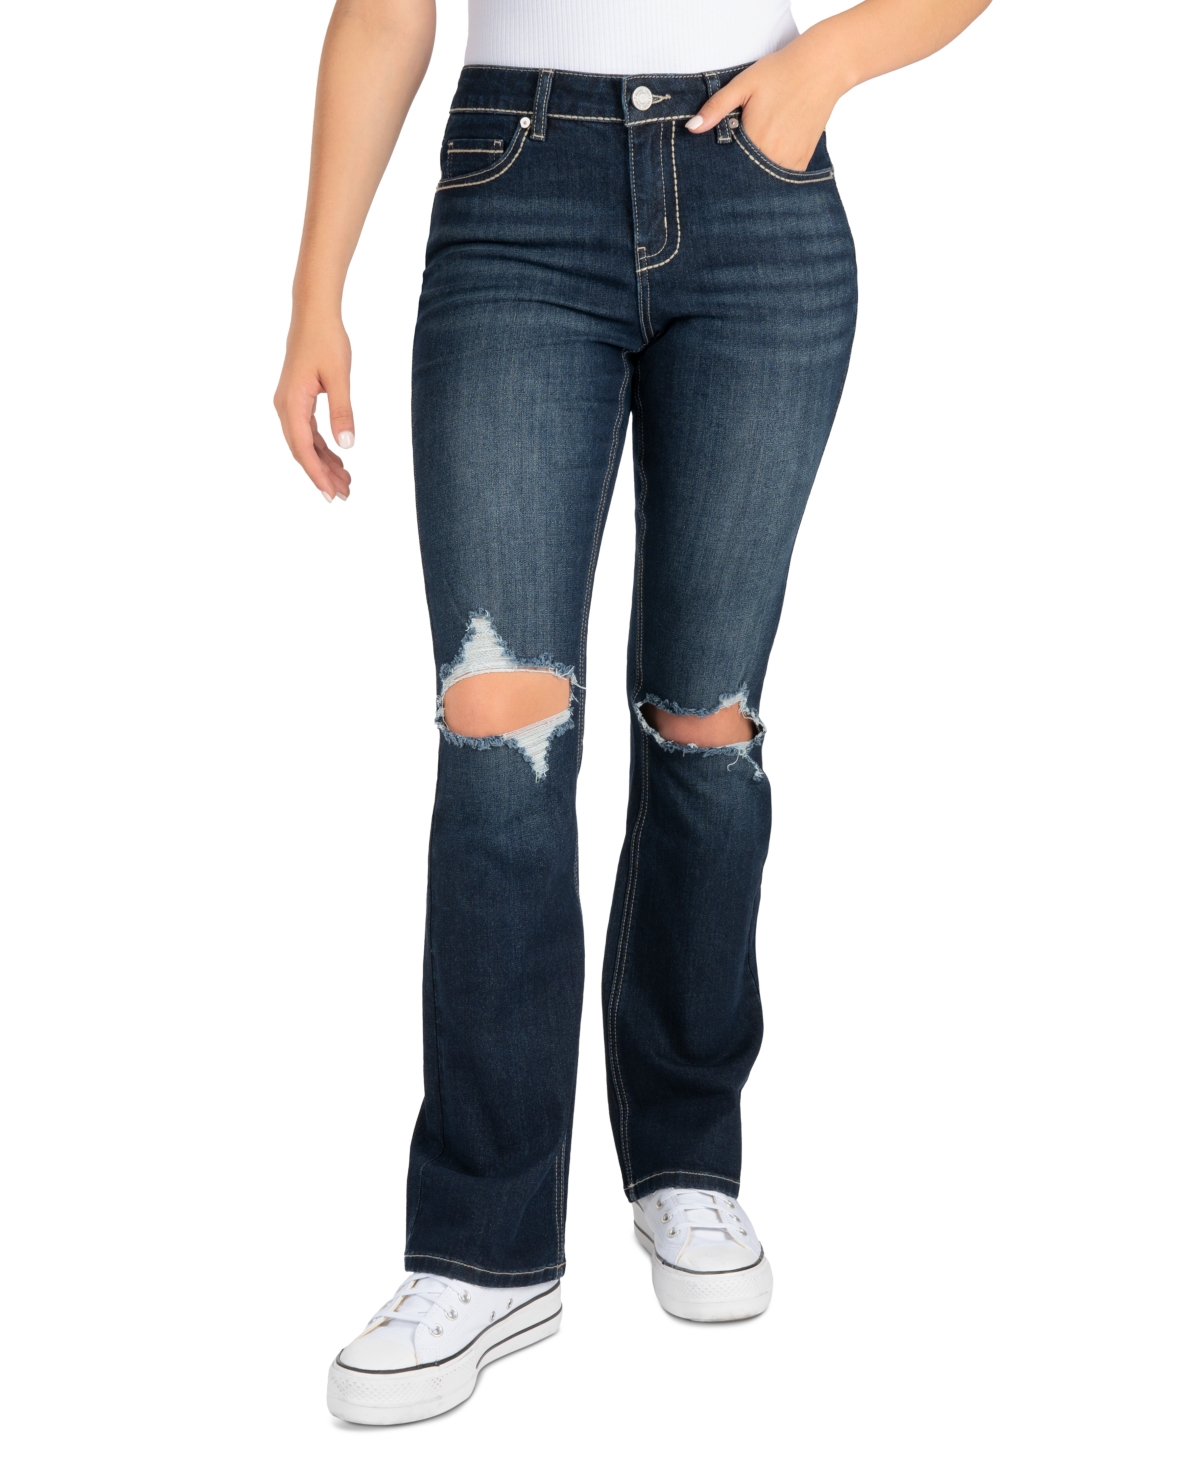 Juniors' Mid-Rise Ripped Bootcut Jeans - Dark Blue